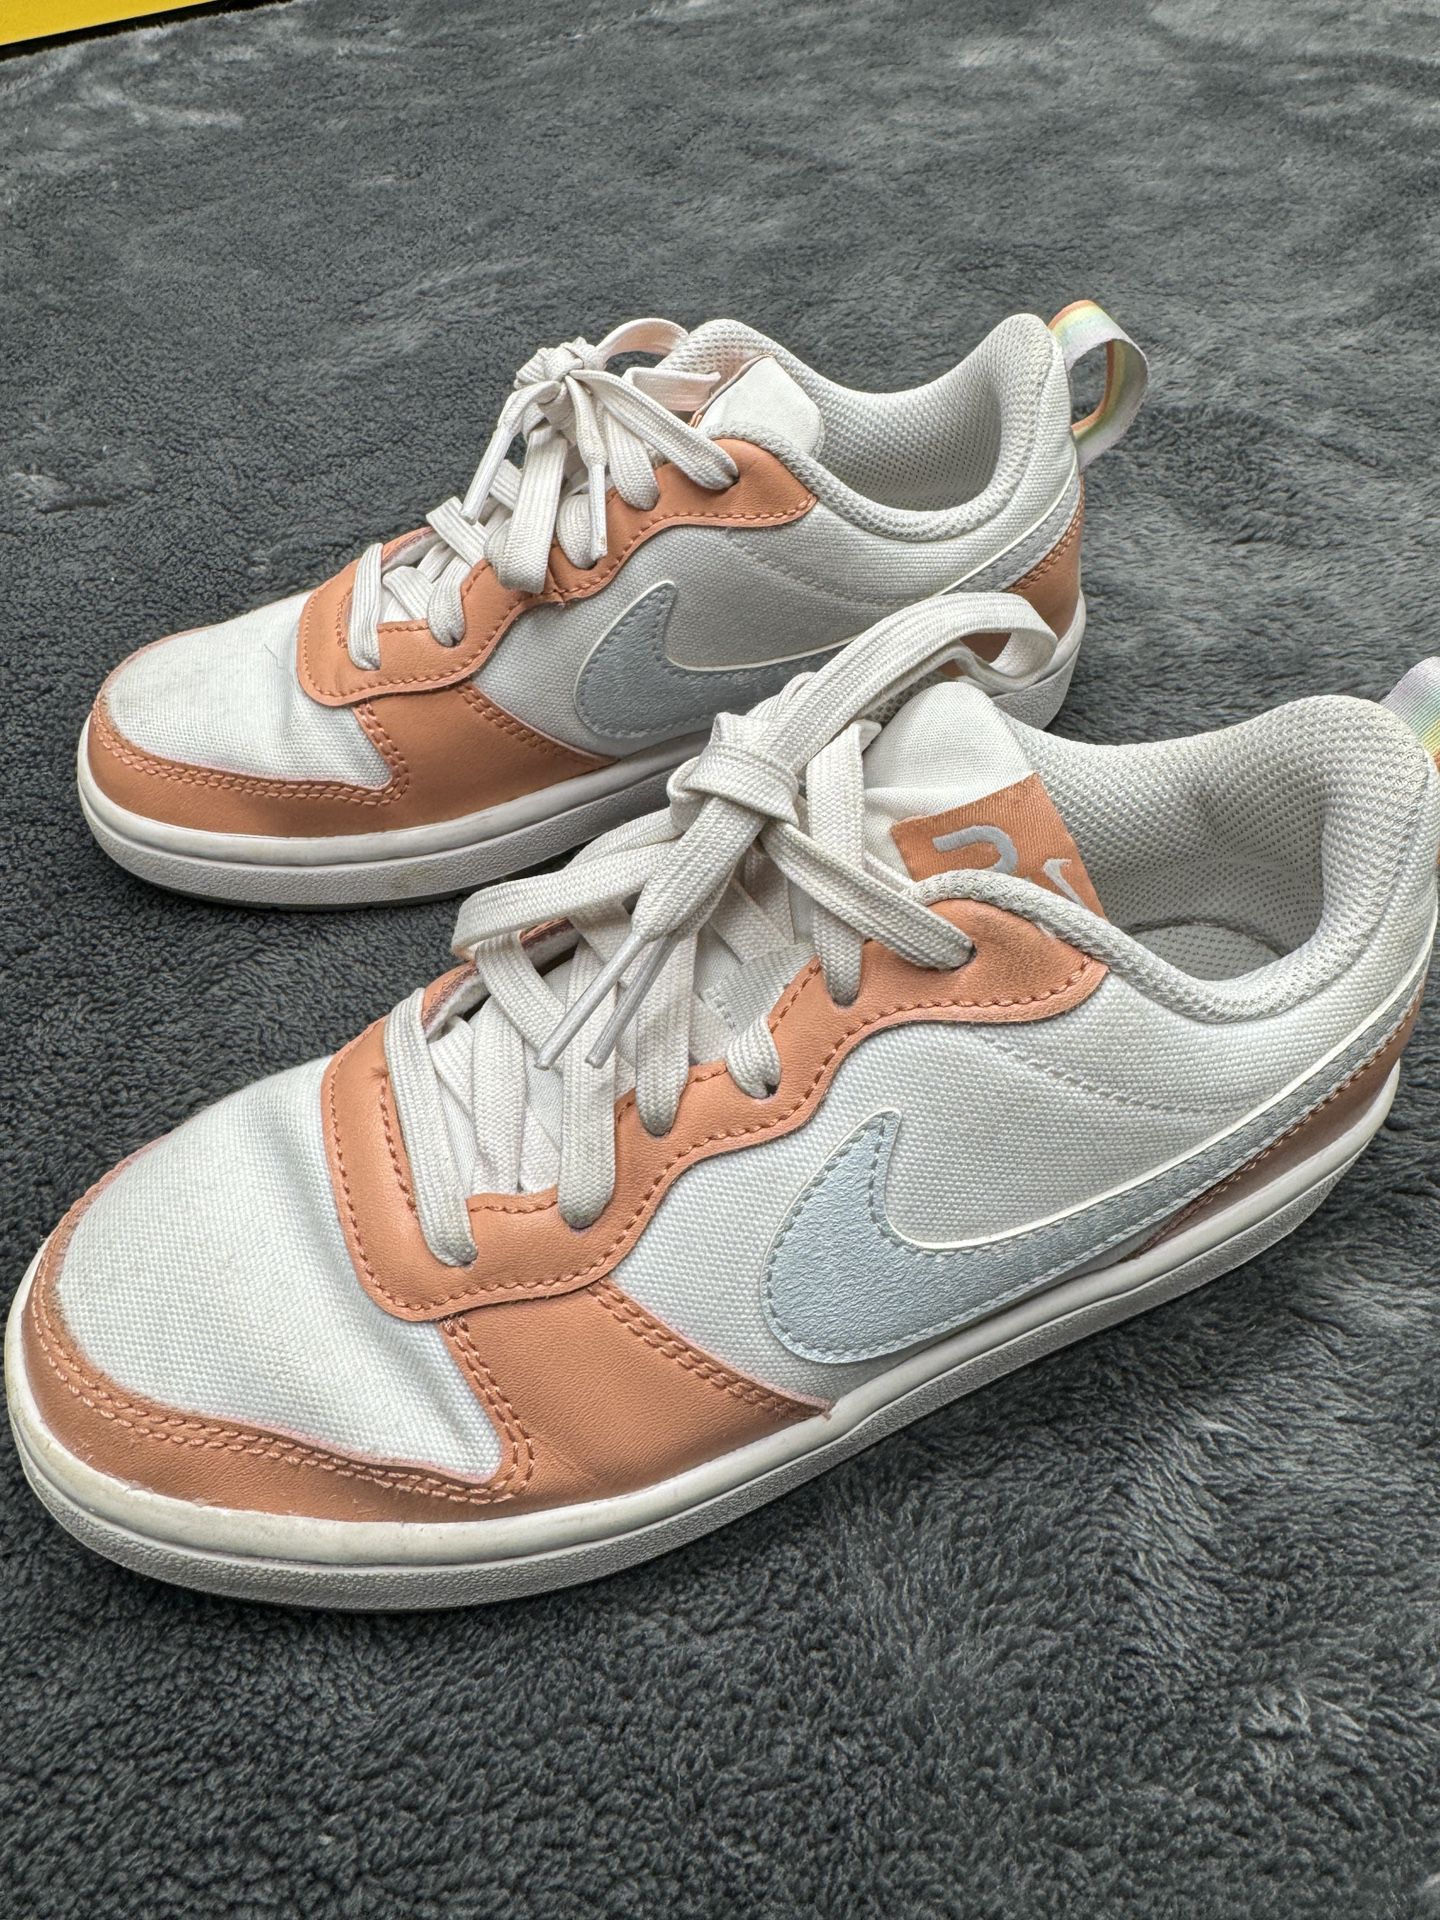 Nike Court Borough Low 2 SE Girl’s Size 3.5 Shoes in great shape!  